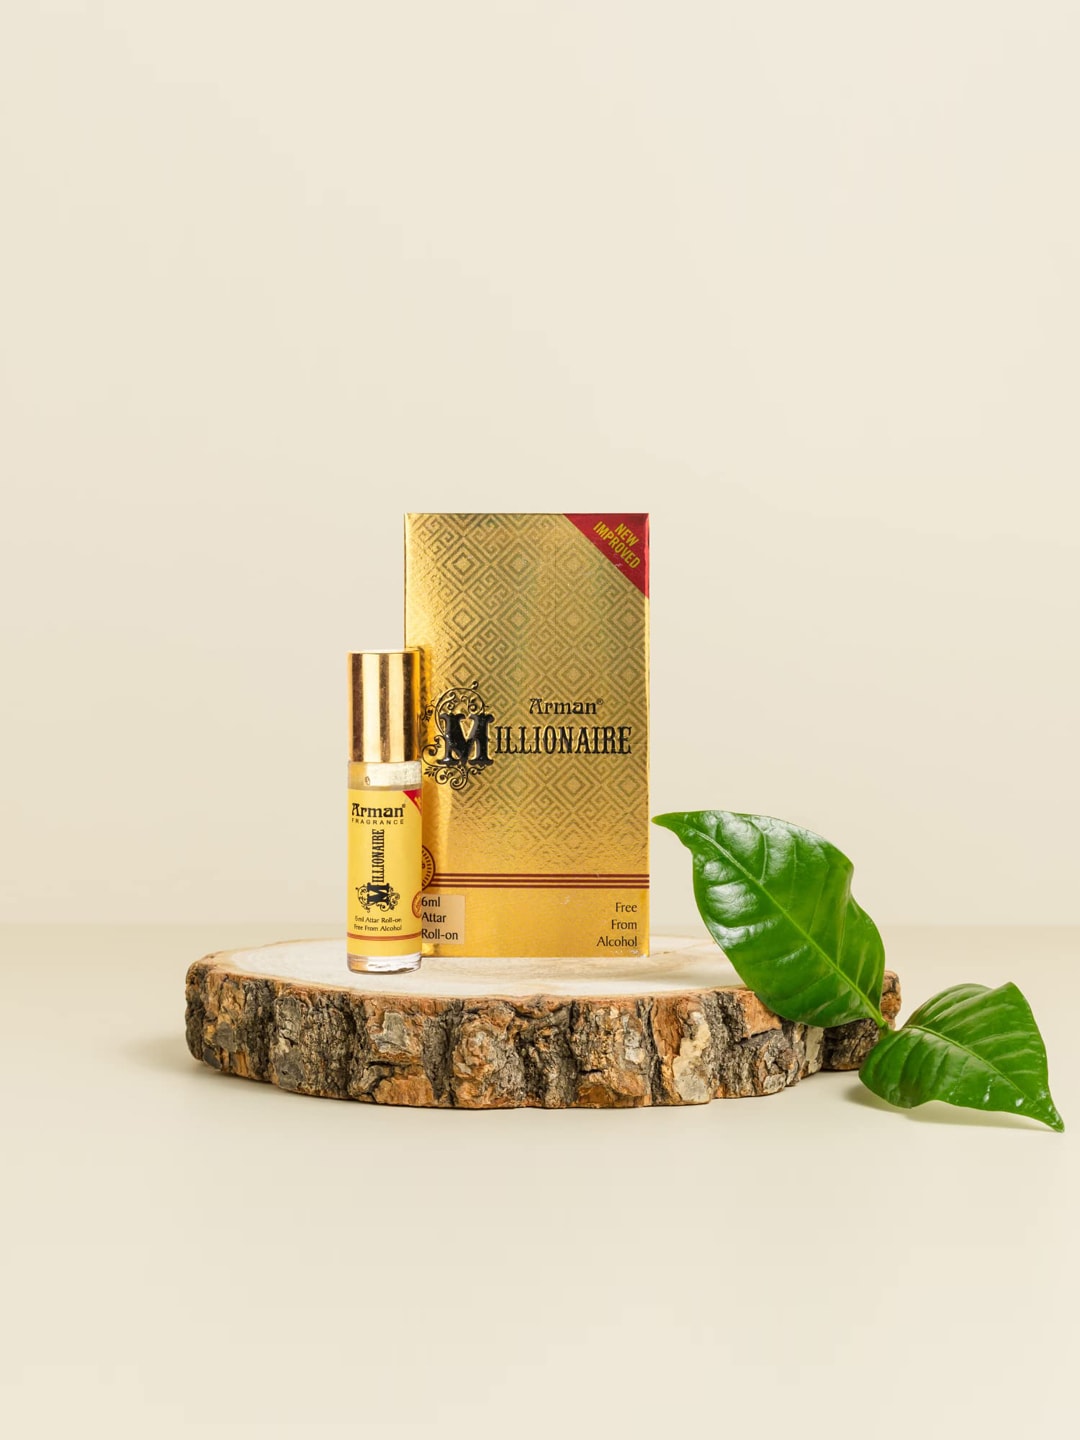 Arman Millionaire Long-Lasting Attar Roll-On - 6ml Price in India